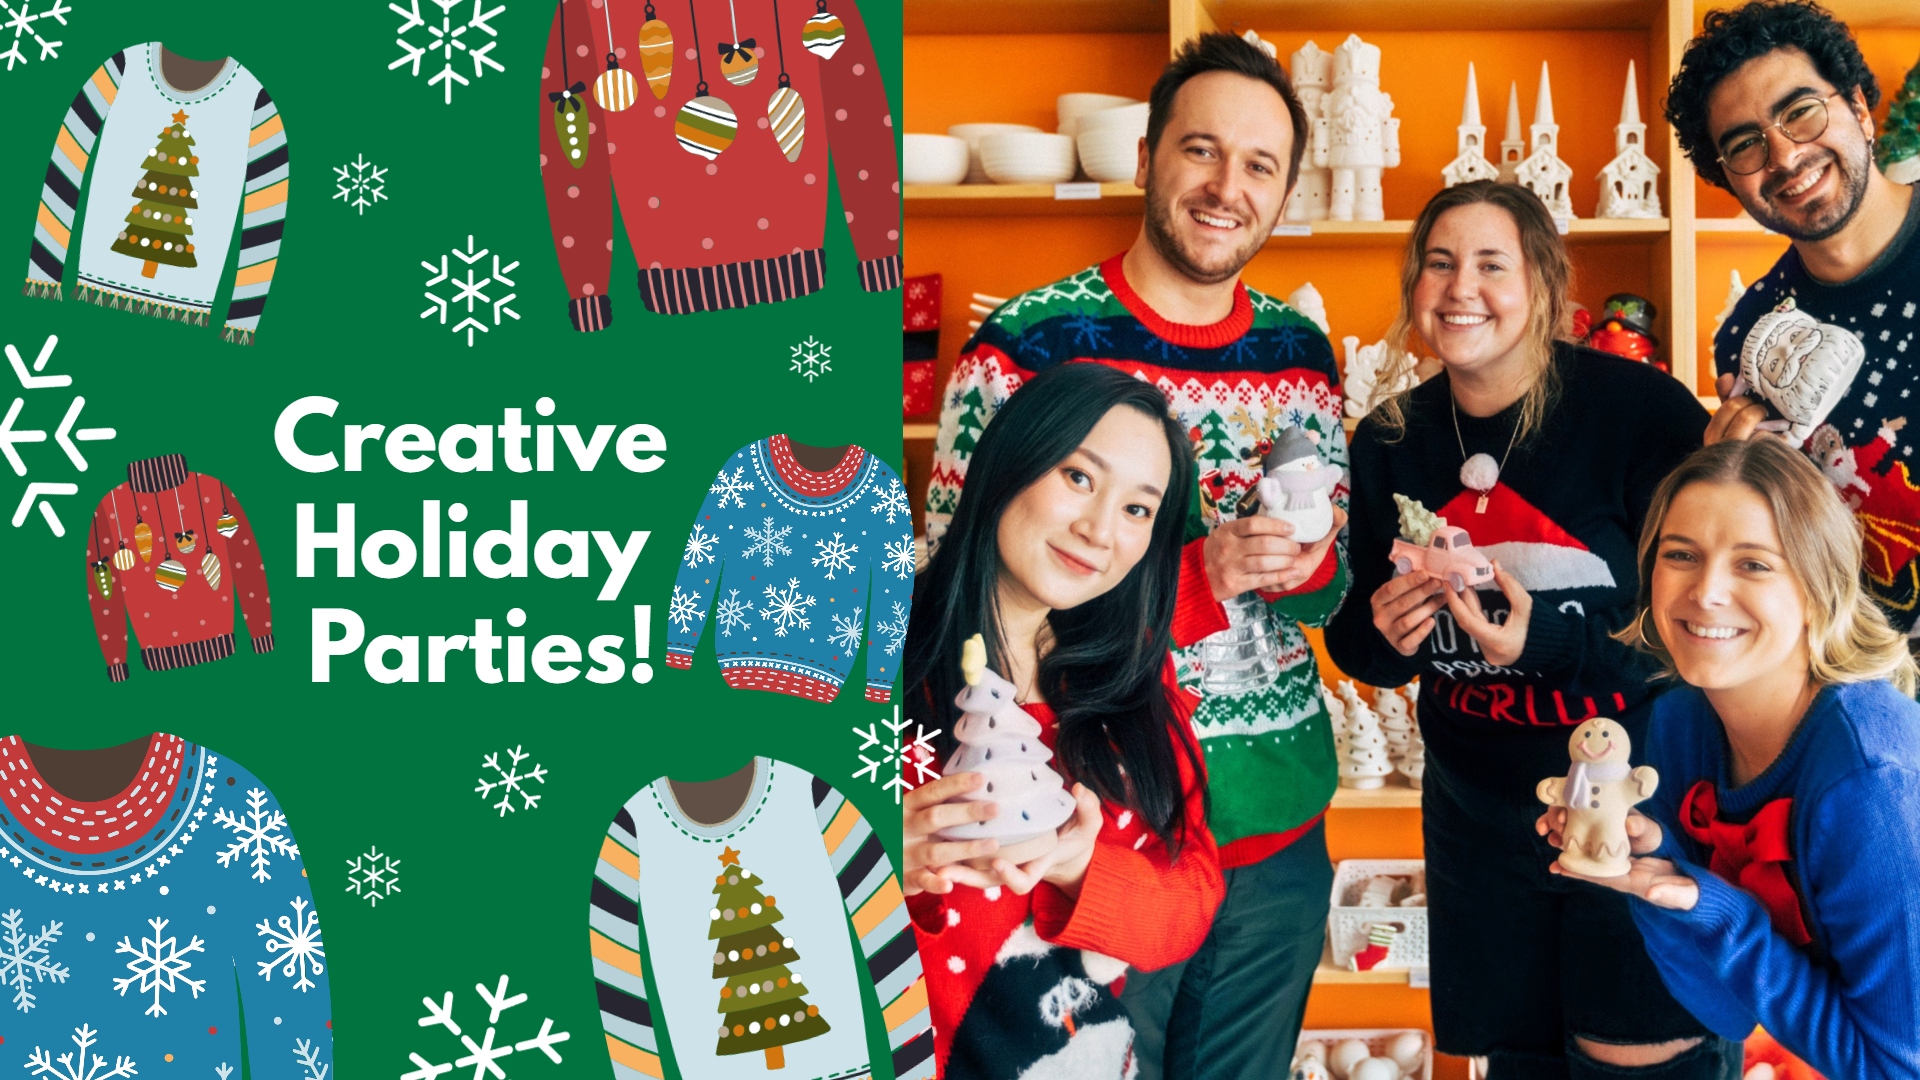 Creative Corporate Holiday Parties